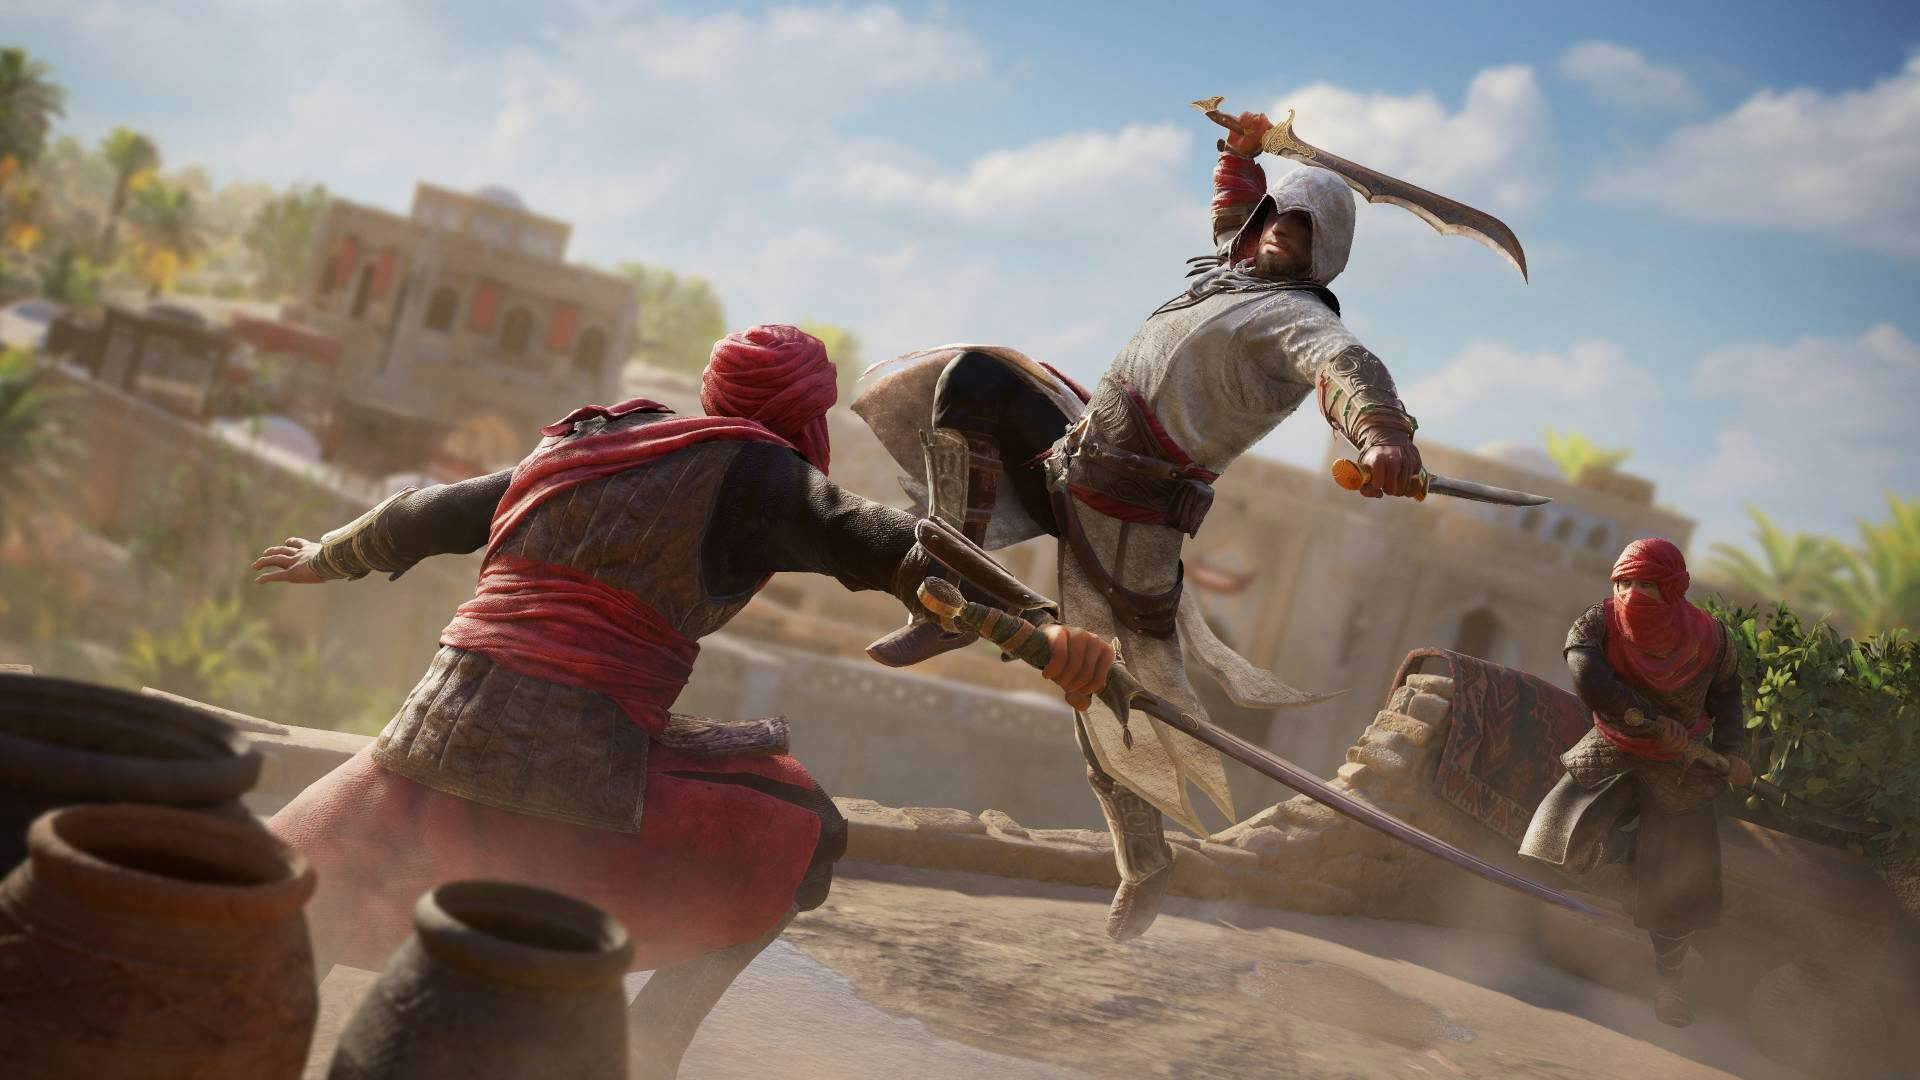 Take a beautiful screenshot of Assassin's Creed Mirage for $5!